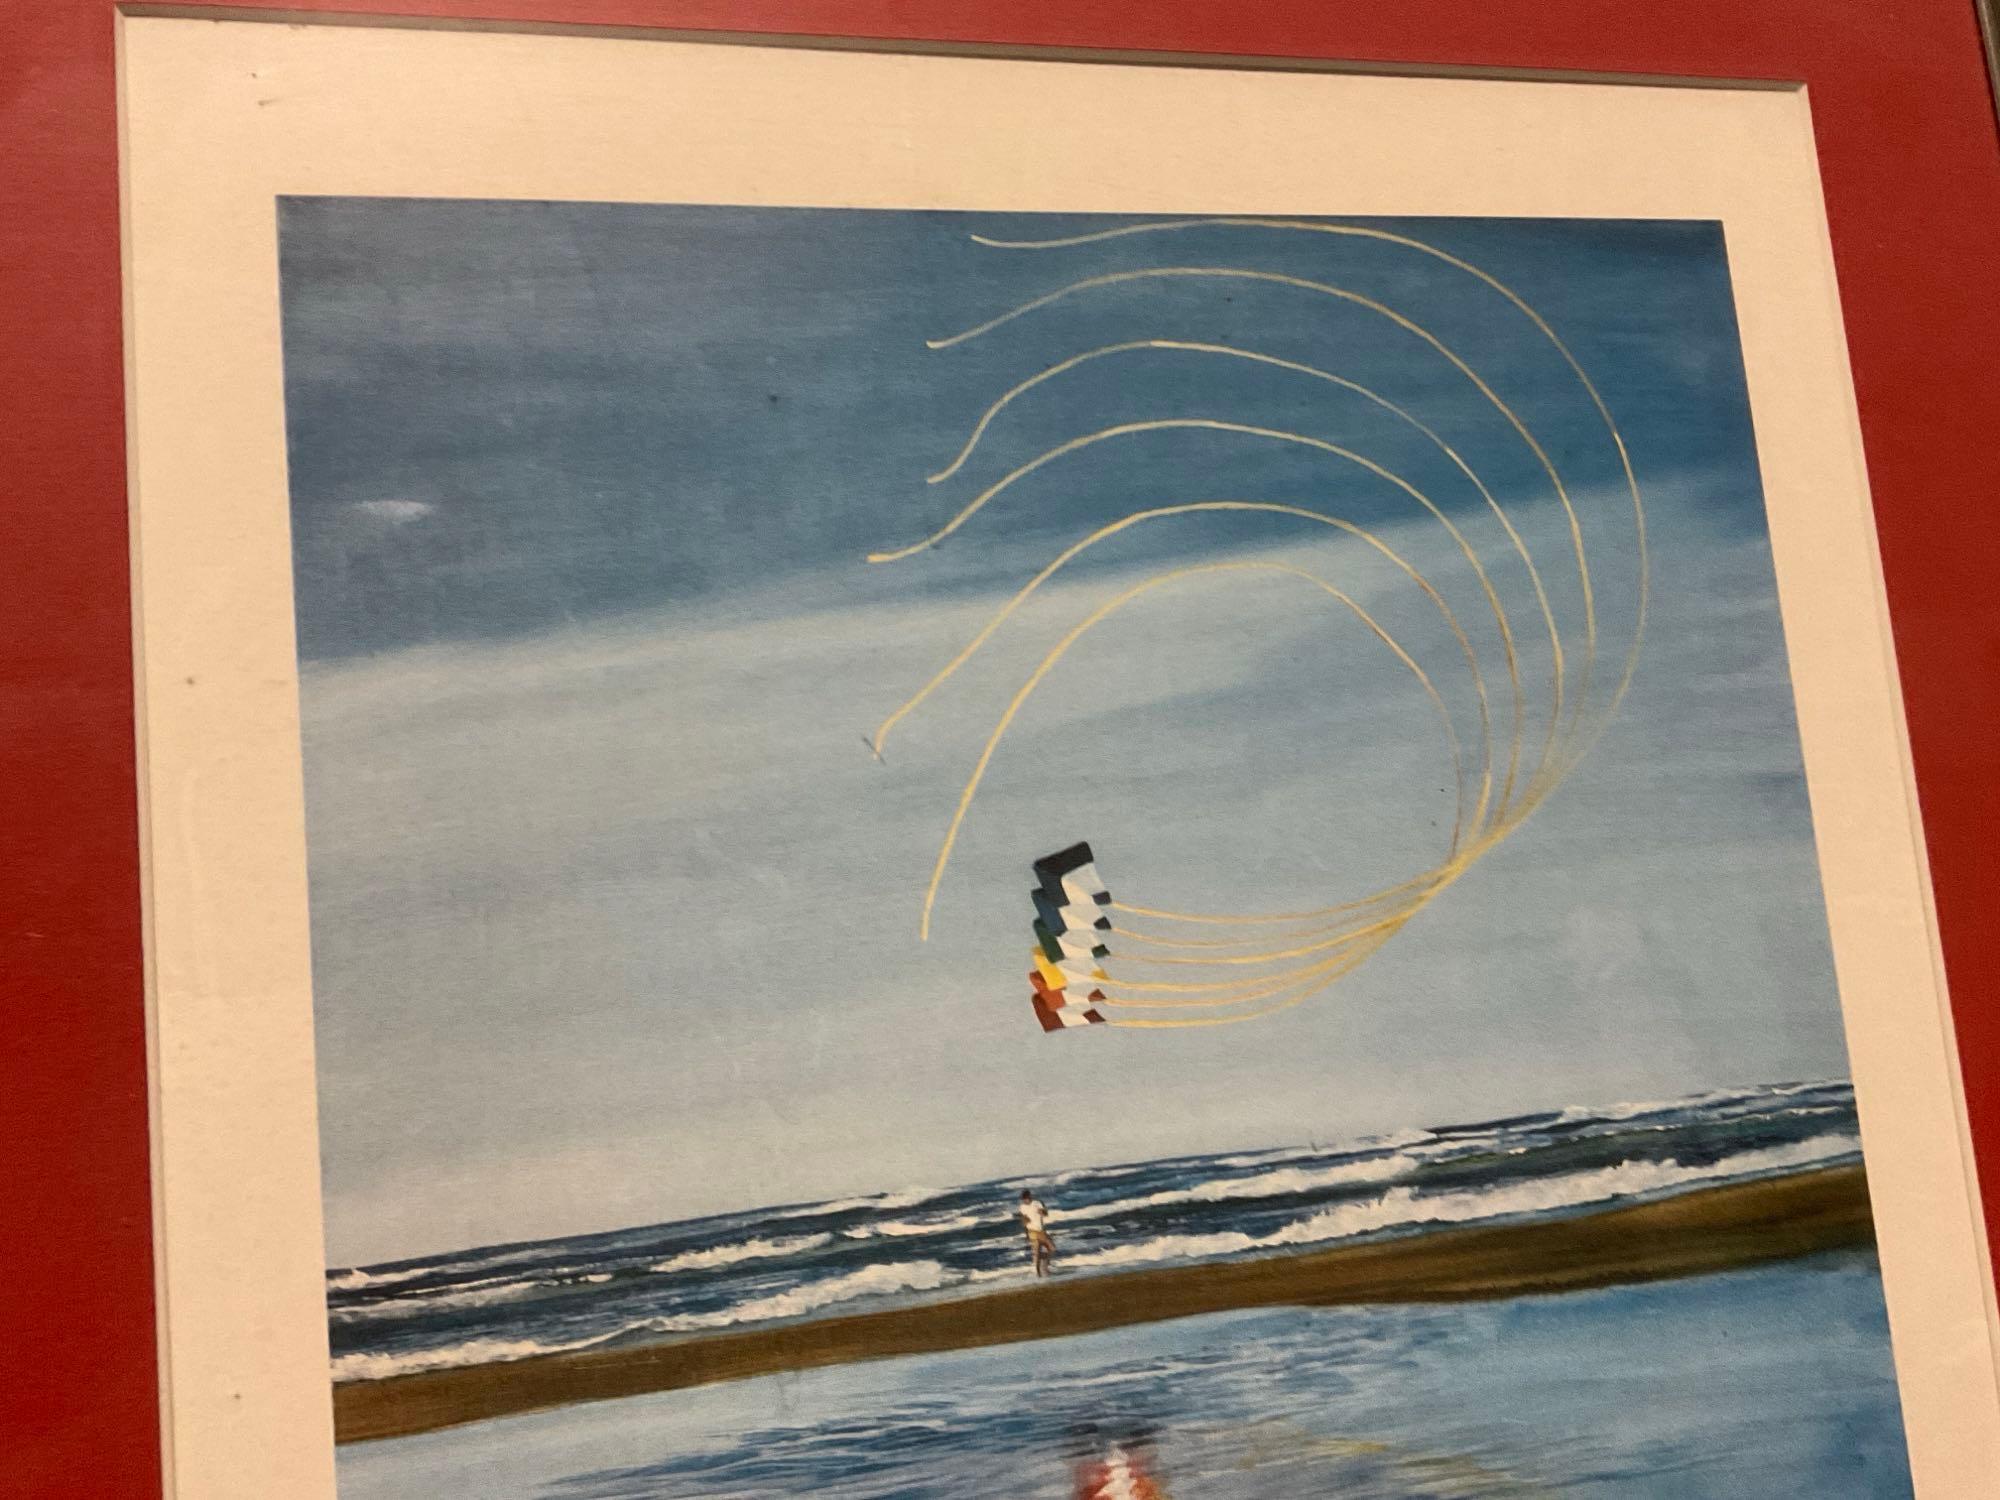 Framed LE Lithograph Signed & #d 299/2000 titled Peter Powell Stunt Kiter by Carol Thompson